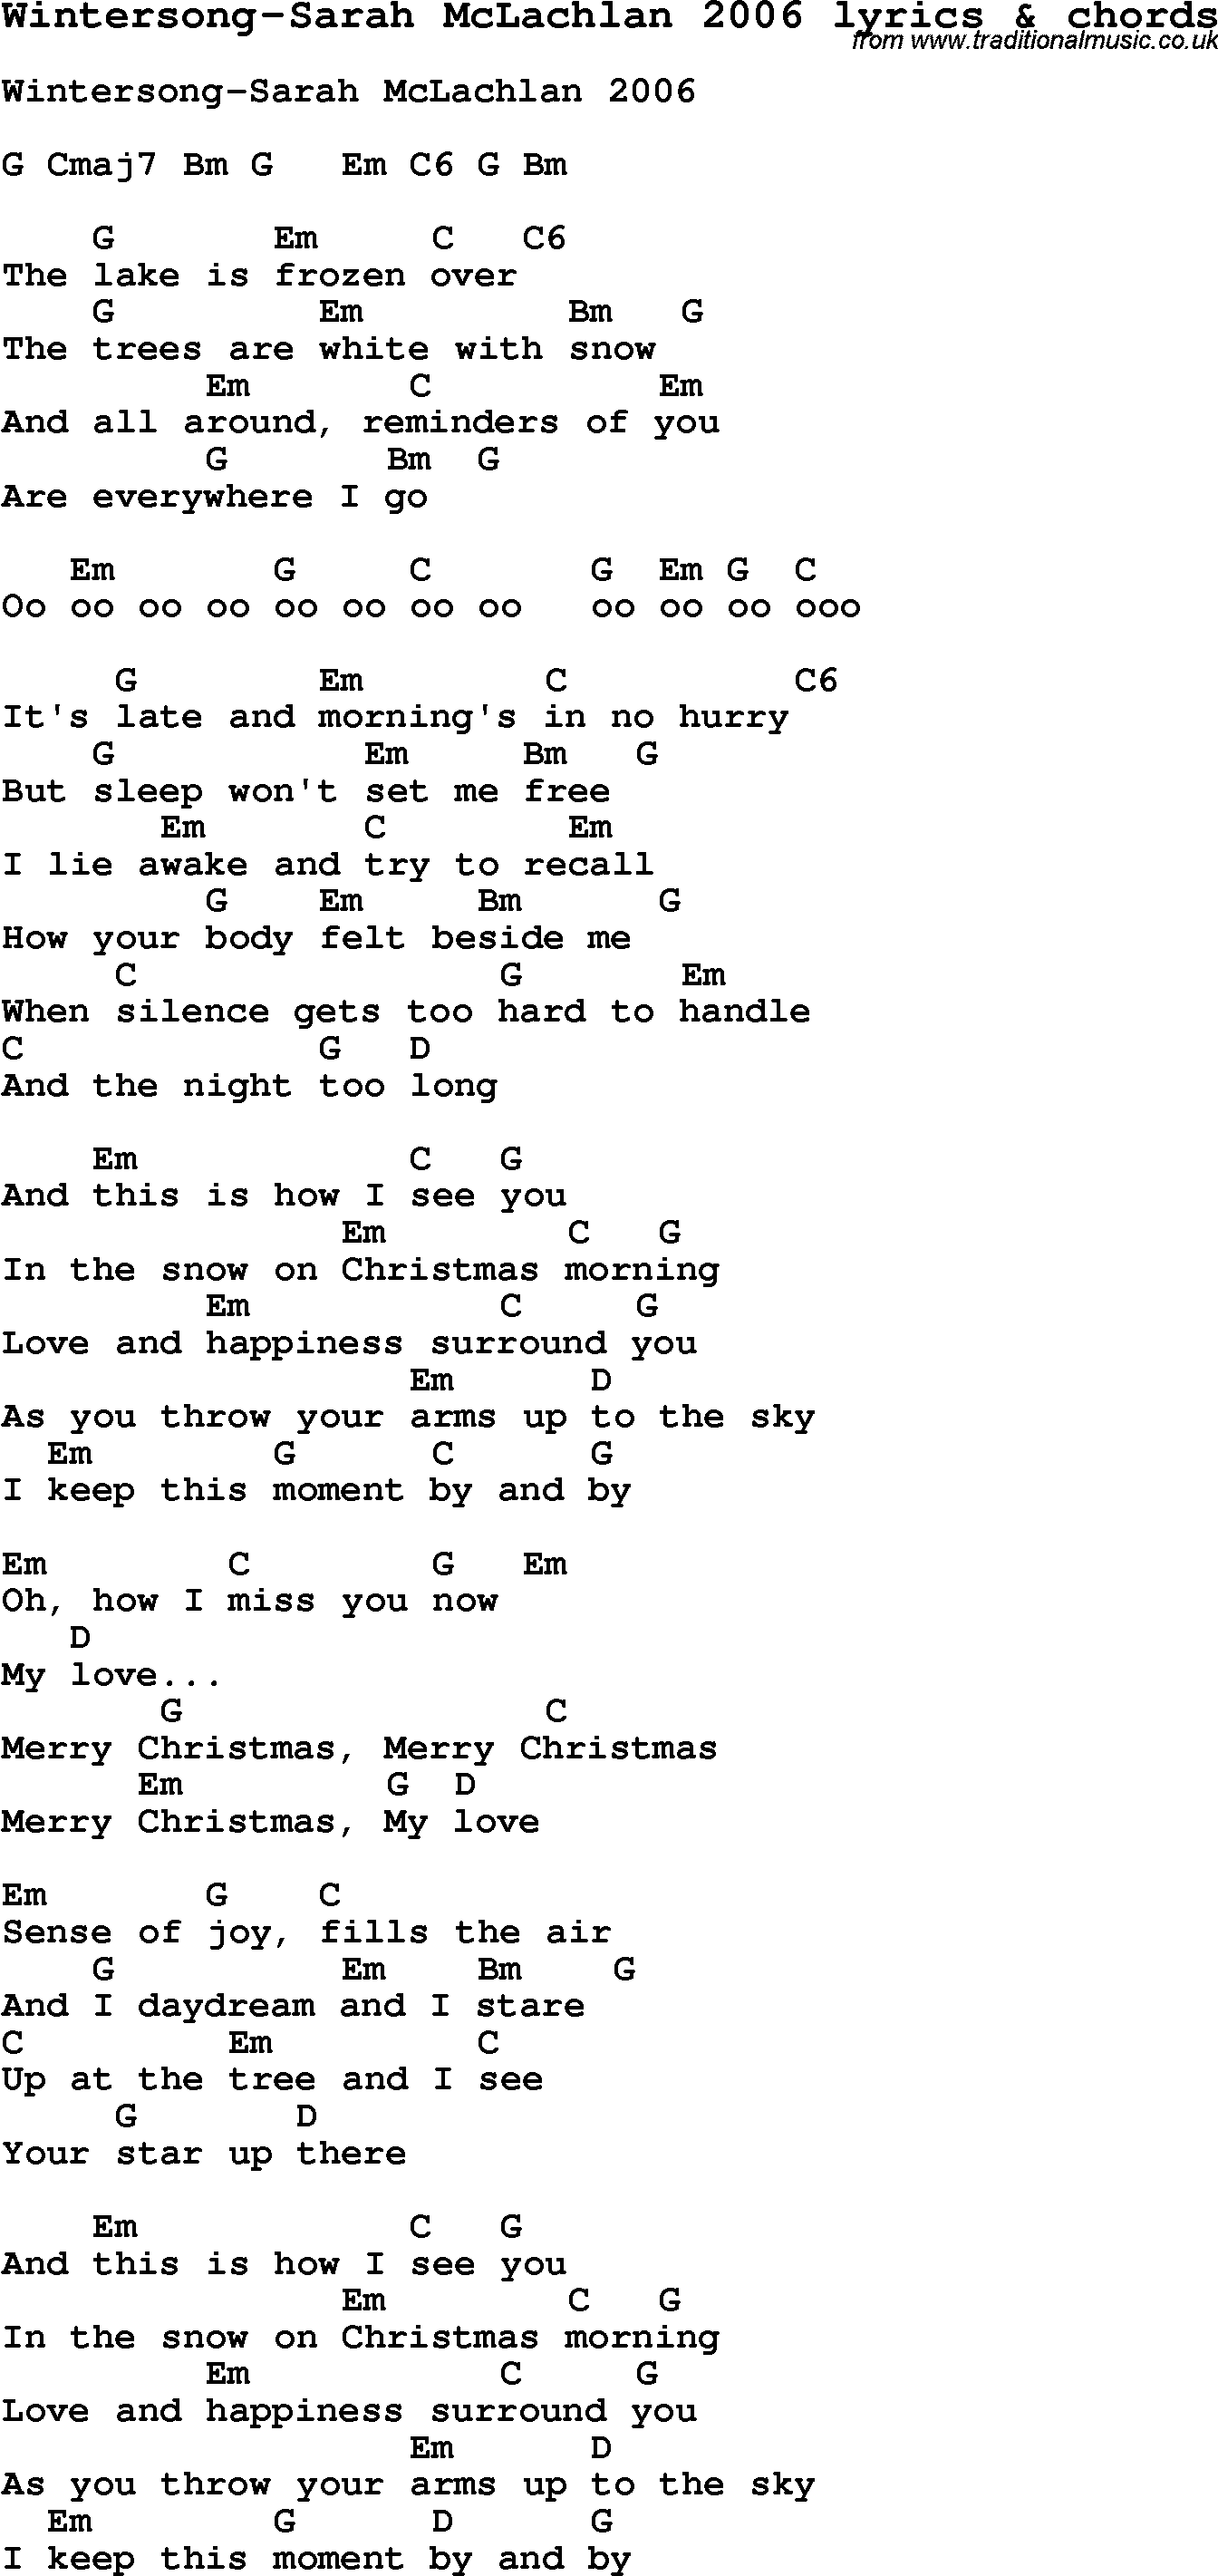 Love Song Lyrics for: Wintersong-Sarah McLachlan 2006 with chords for Ukulele, Guitar Banjo etc.